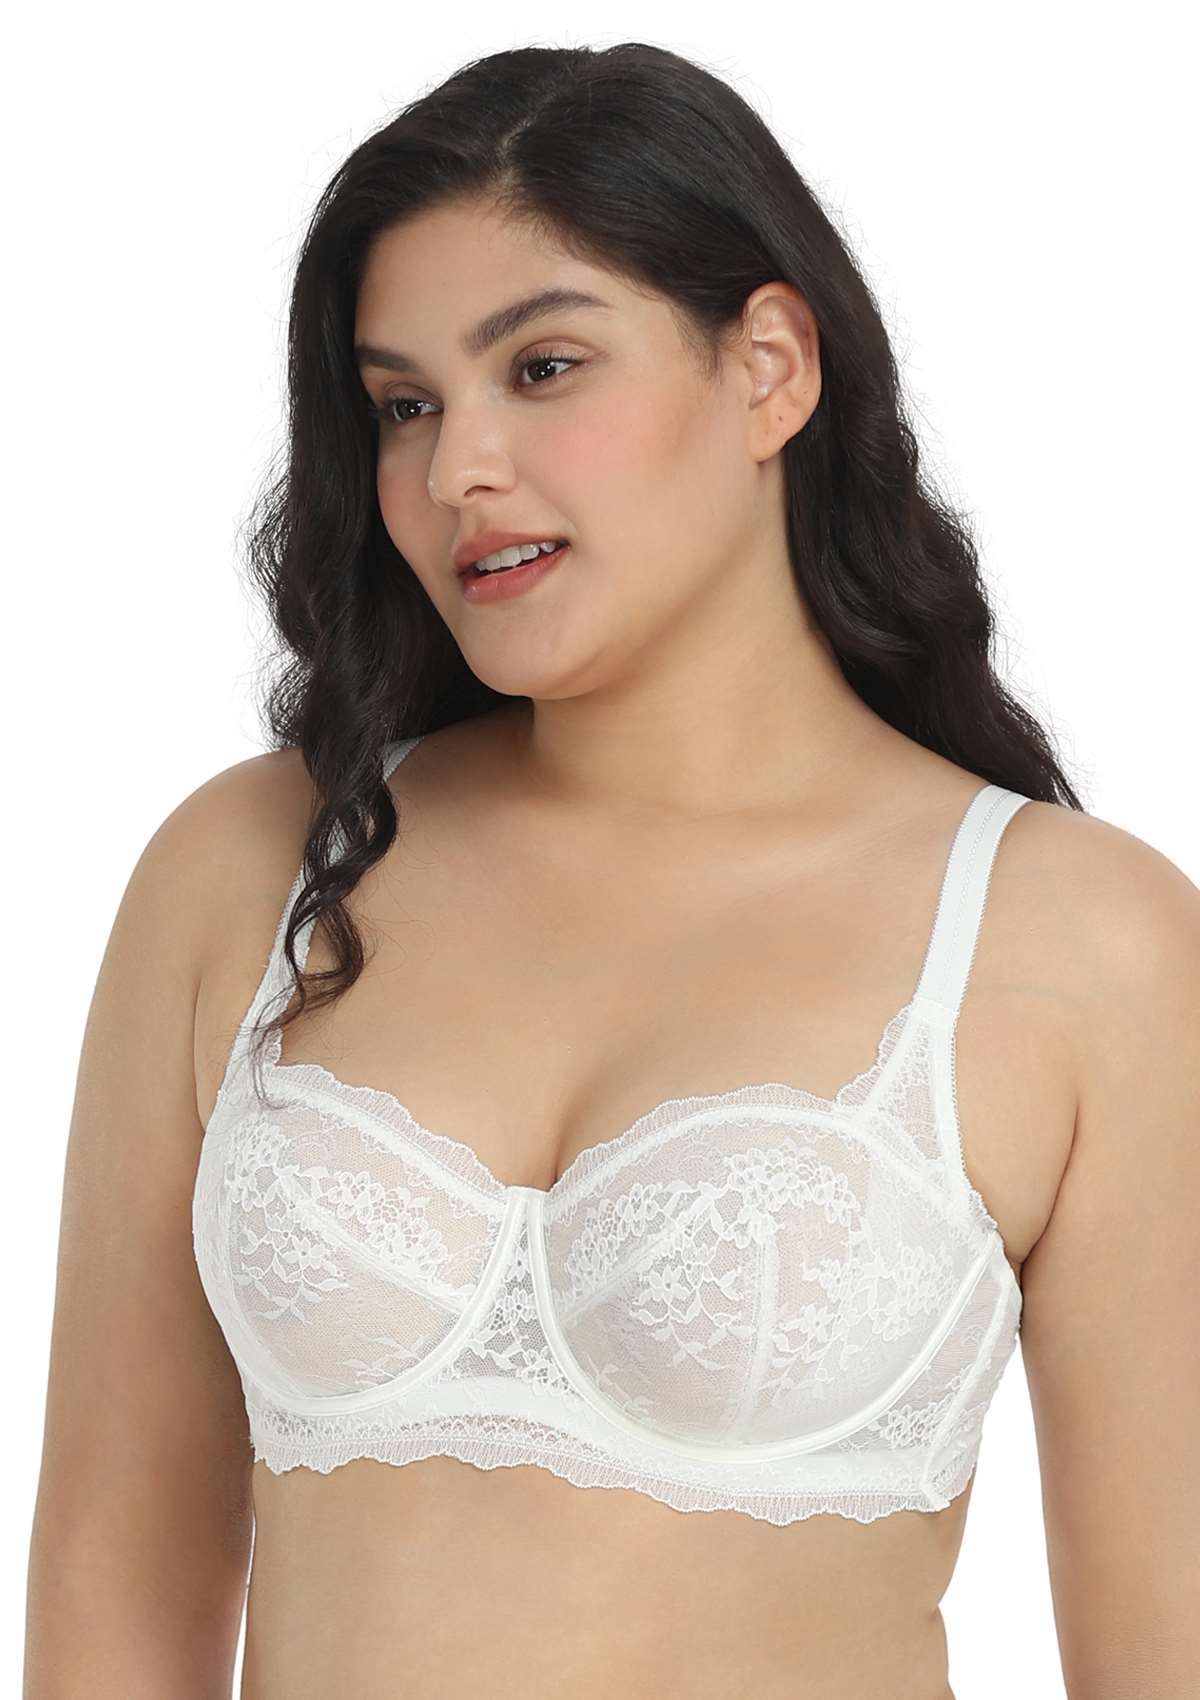 HSIA I Do Floral Lace Bridal Balconette Beautiful Bra For Special Day - Burgundy / 36 / DD/E